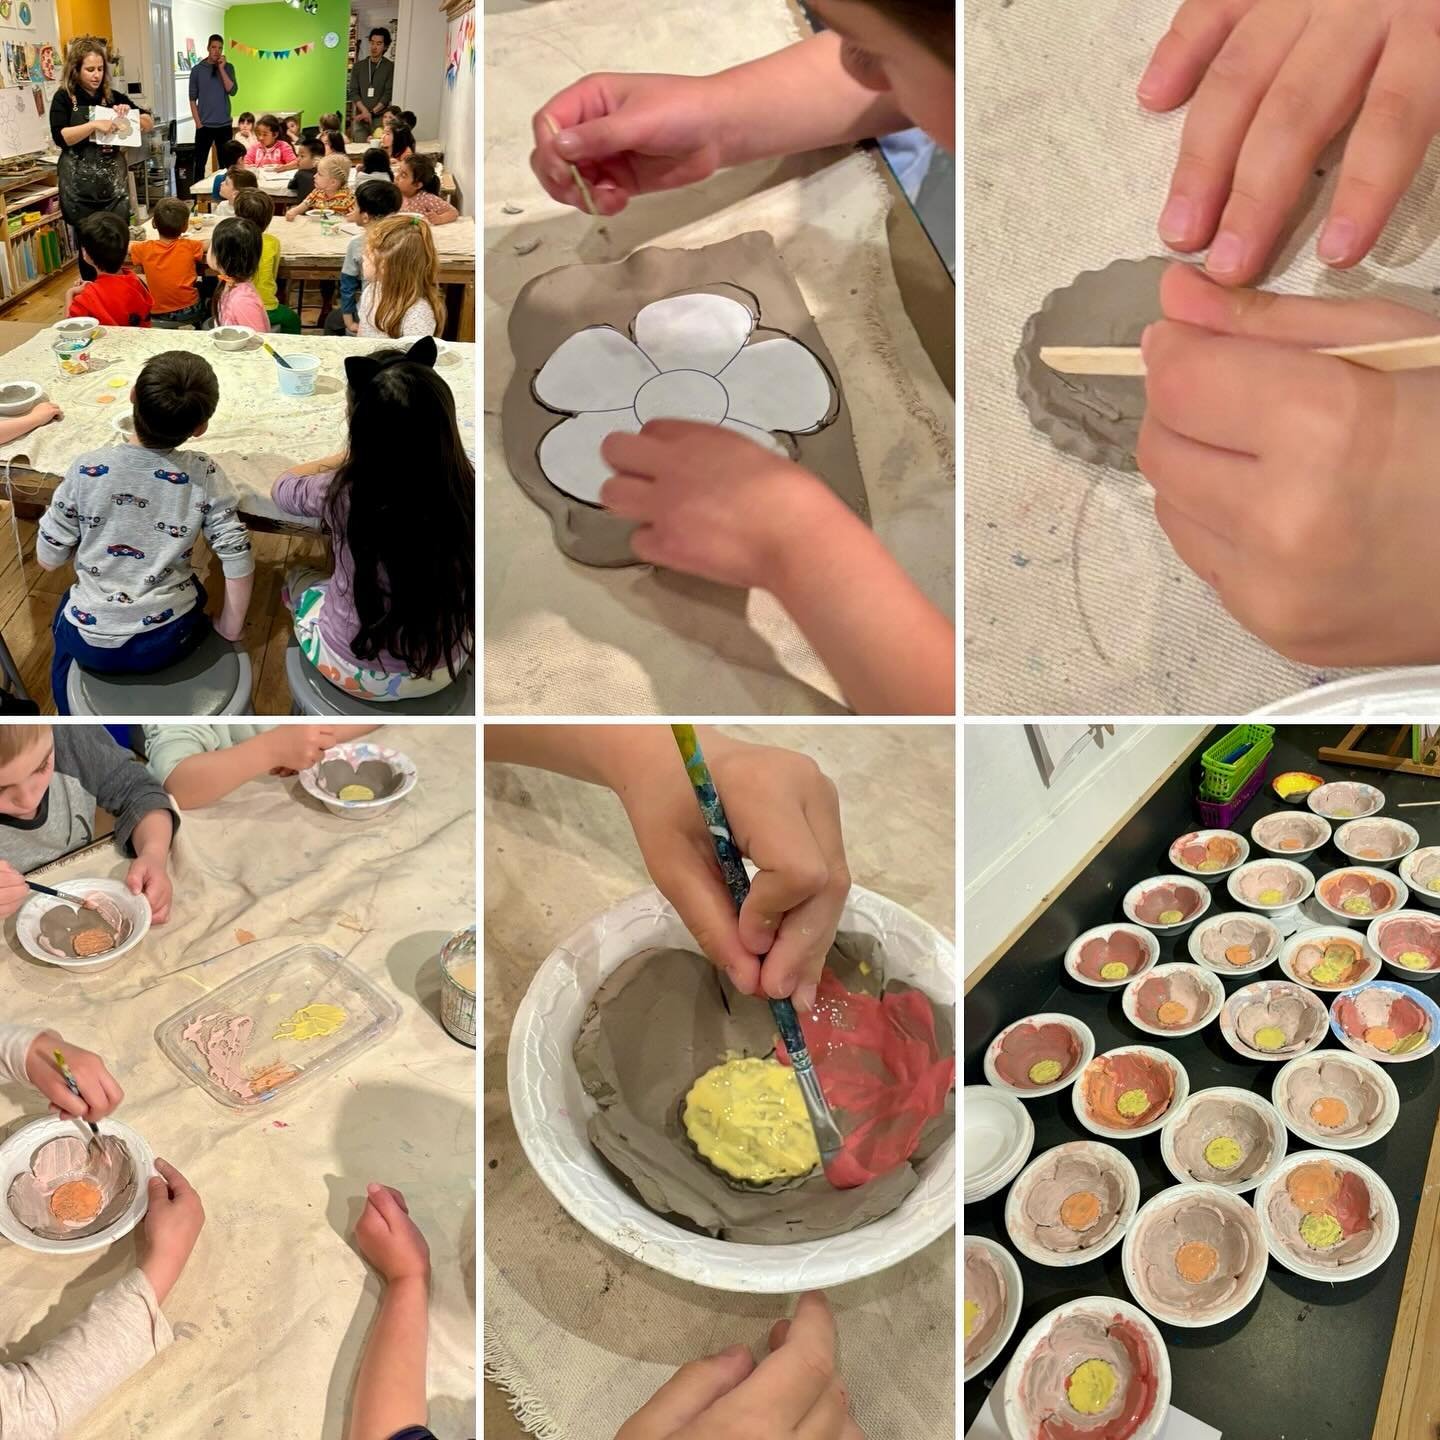 #Didyouknow that we offer #schoolgroupworkshops at Freehand? Today we had the pleasure of hosting a wonderful group of #kindergartenartists from @bedfordparkpsto for a #ceramics workshop. We learned all about clay, and built and glazed our own spring